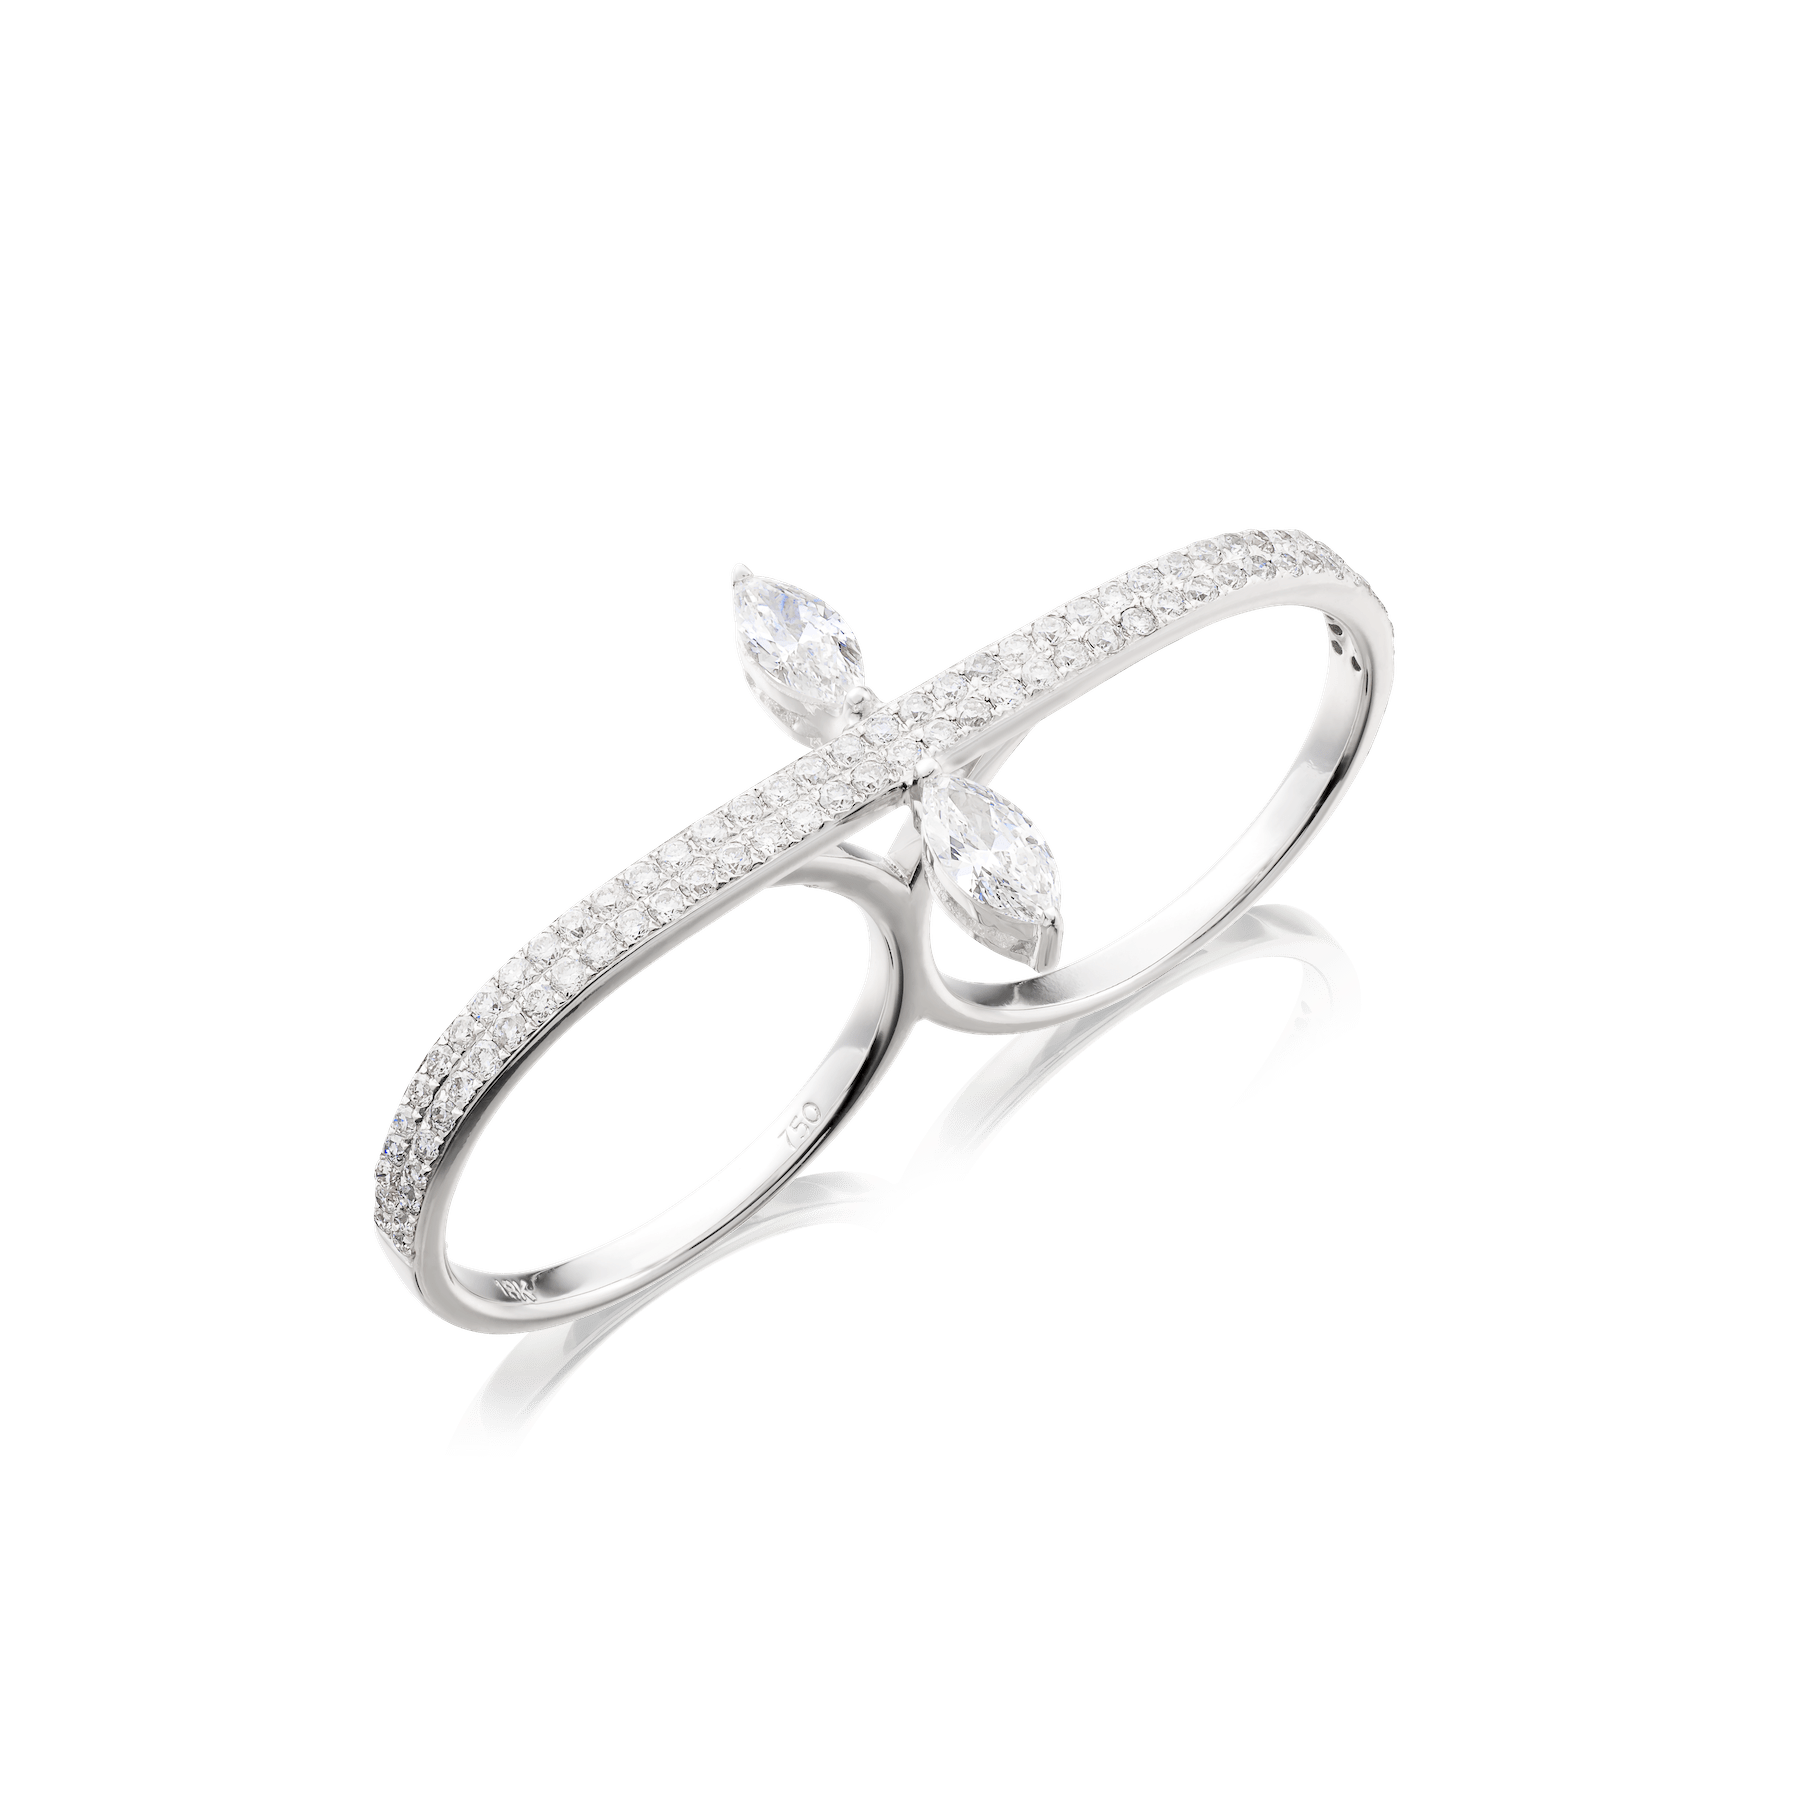 Buy designer Silver Rings Online - Blossom Two Finger Ring -Quirksmith